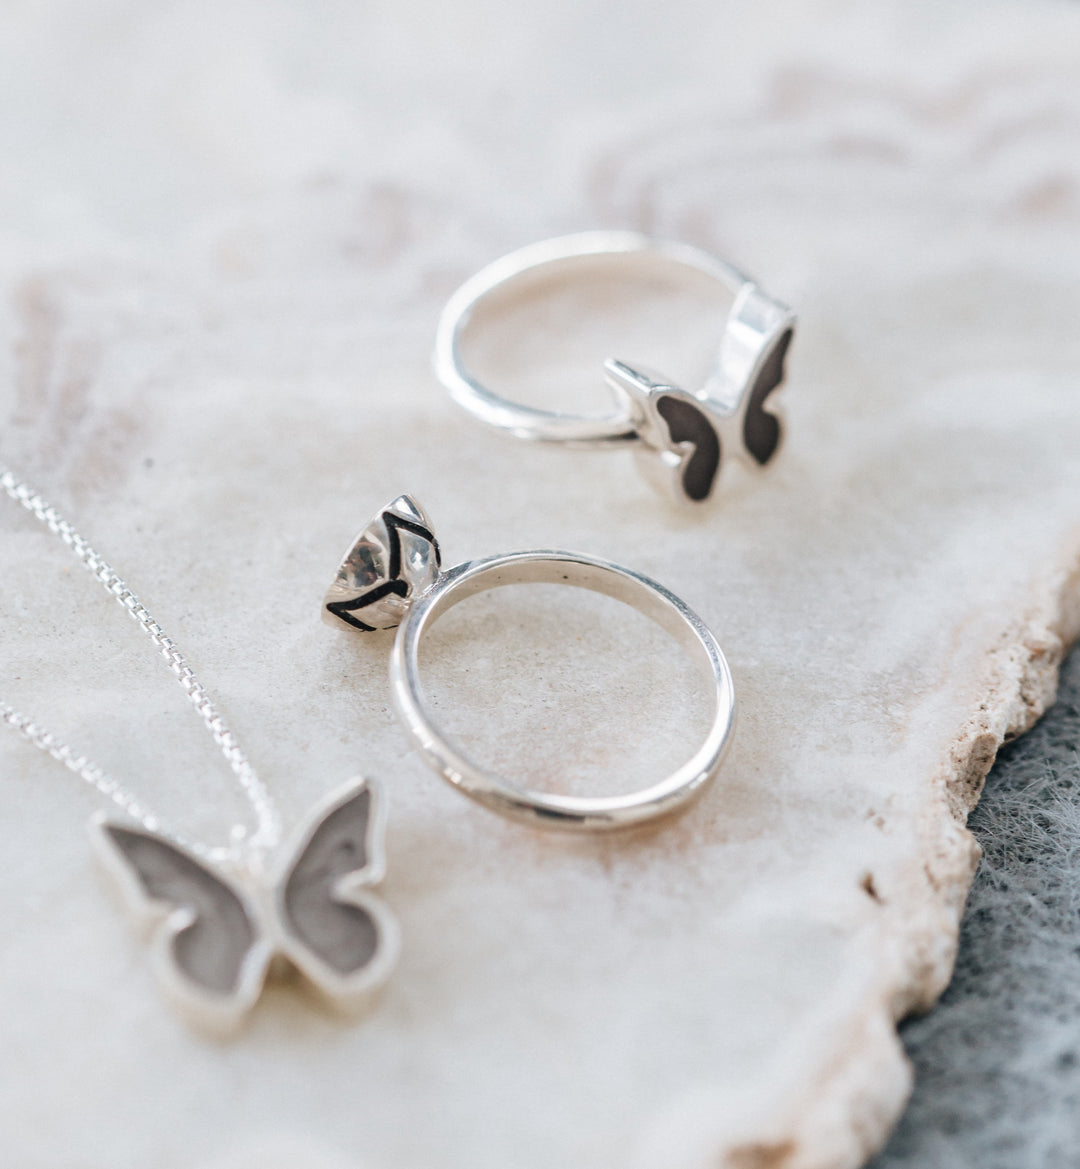 Pictured here is the Sterling Silver Cremated Remains Butterfly Ashes Collection alongside the Sterling Silver Signature Lotus Stackable Band Ring with ashes, all designed by close by me jewelry